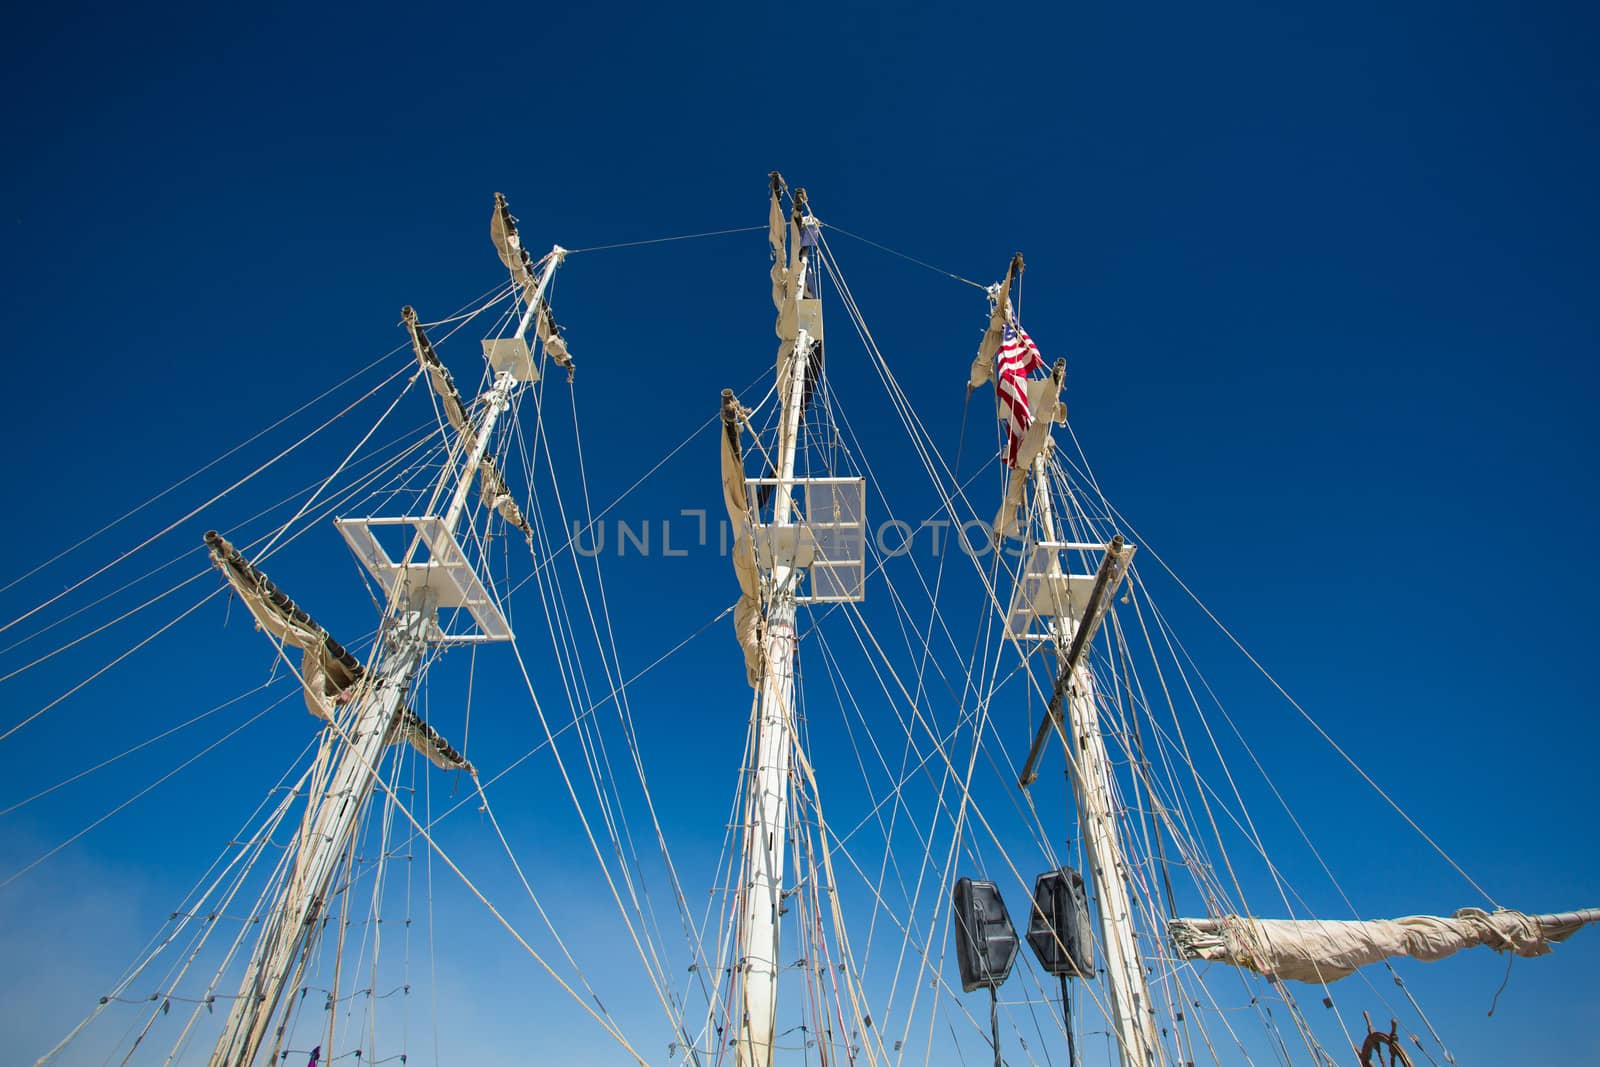 Details of a replica of a sailing boat with speakers and the American Flag with a clear sky in the background